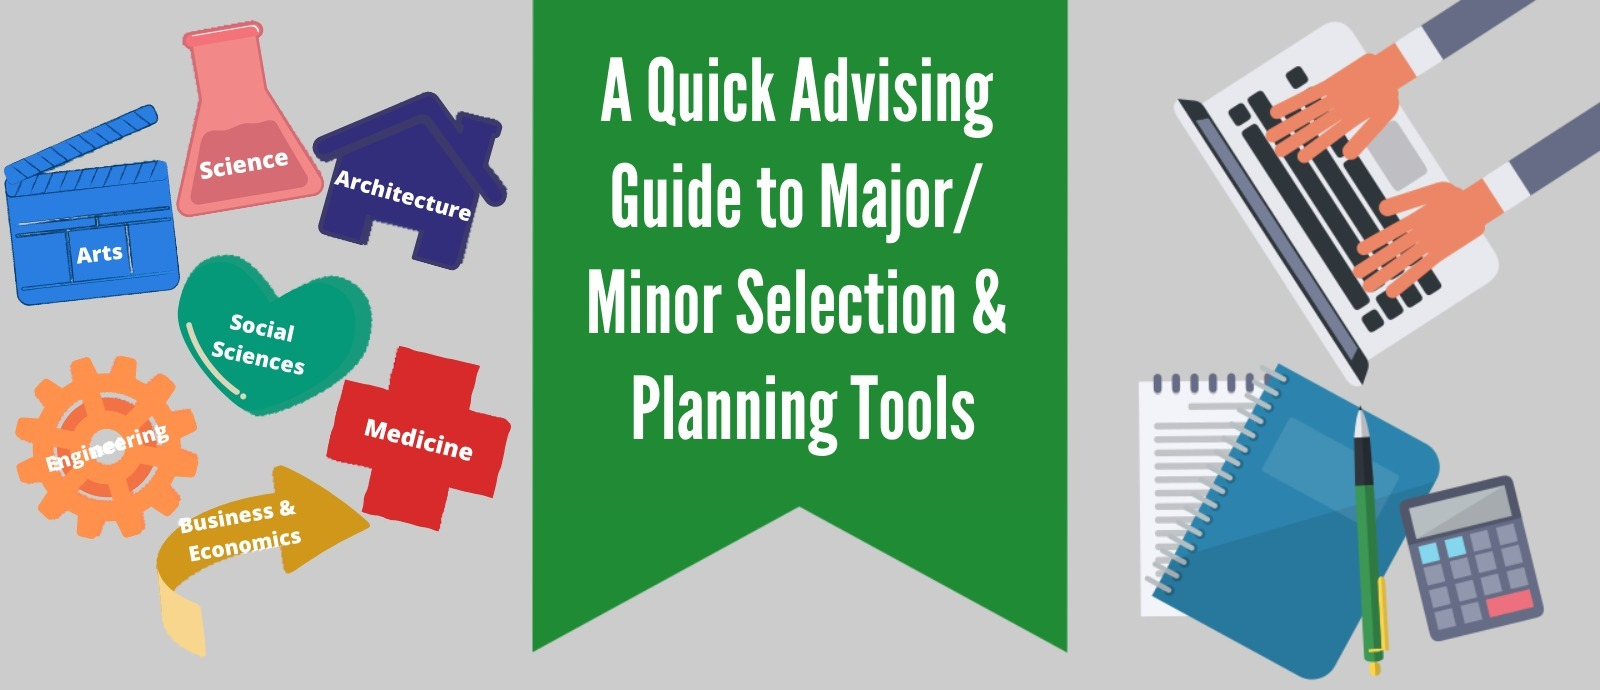 picture banner of A Quick Advising Guide to Major/Minor Selection and Planning Tools